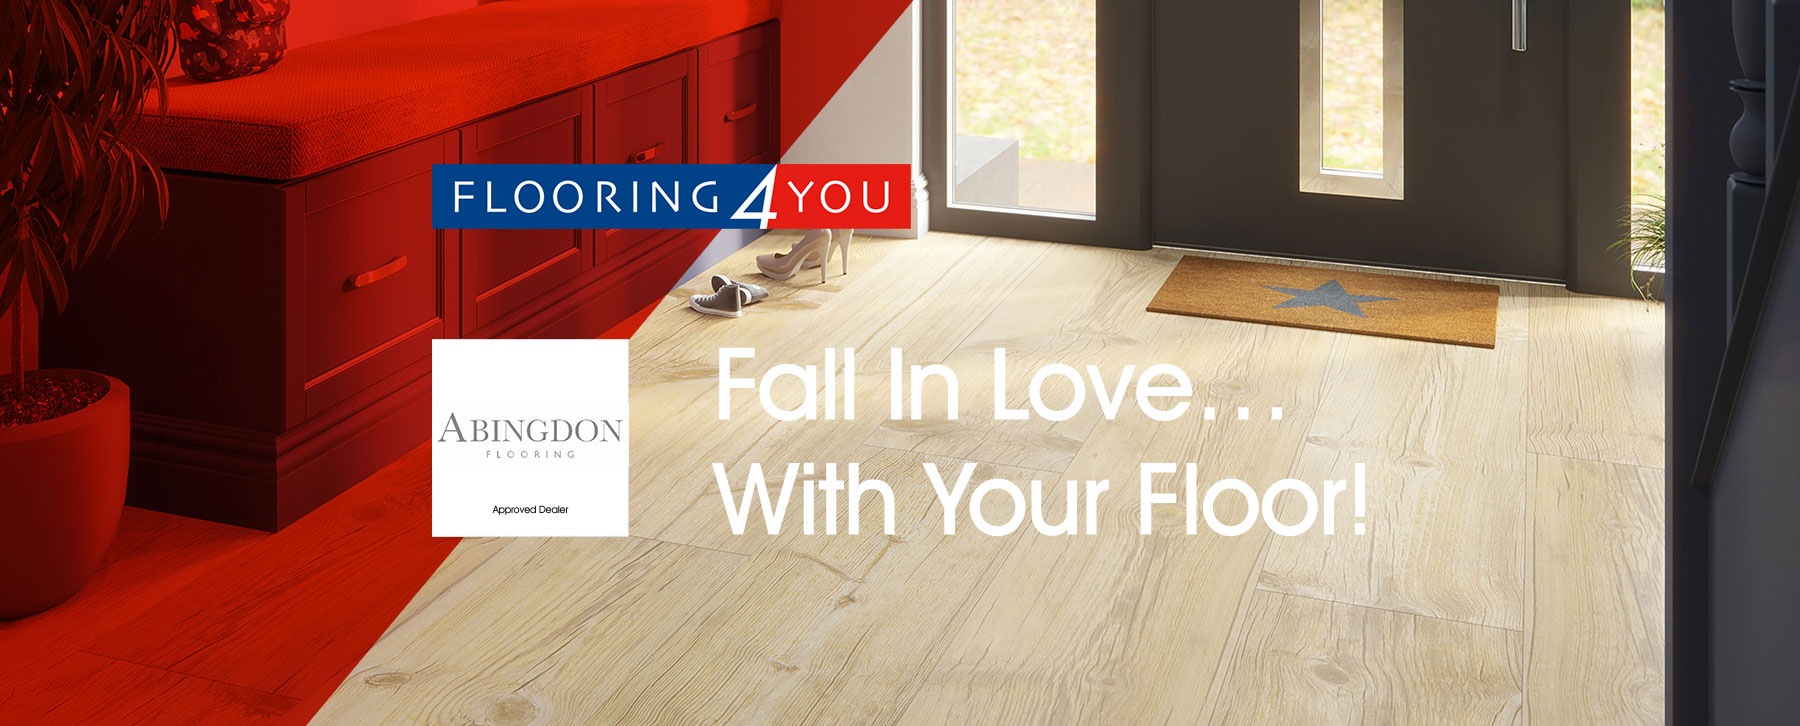 Abingdon - Fall in love with your floor!